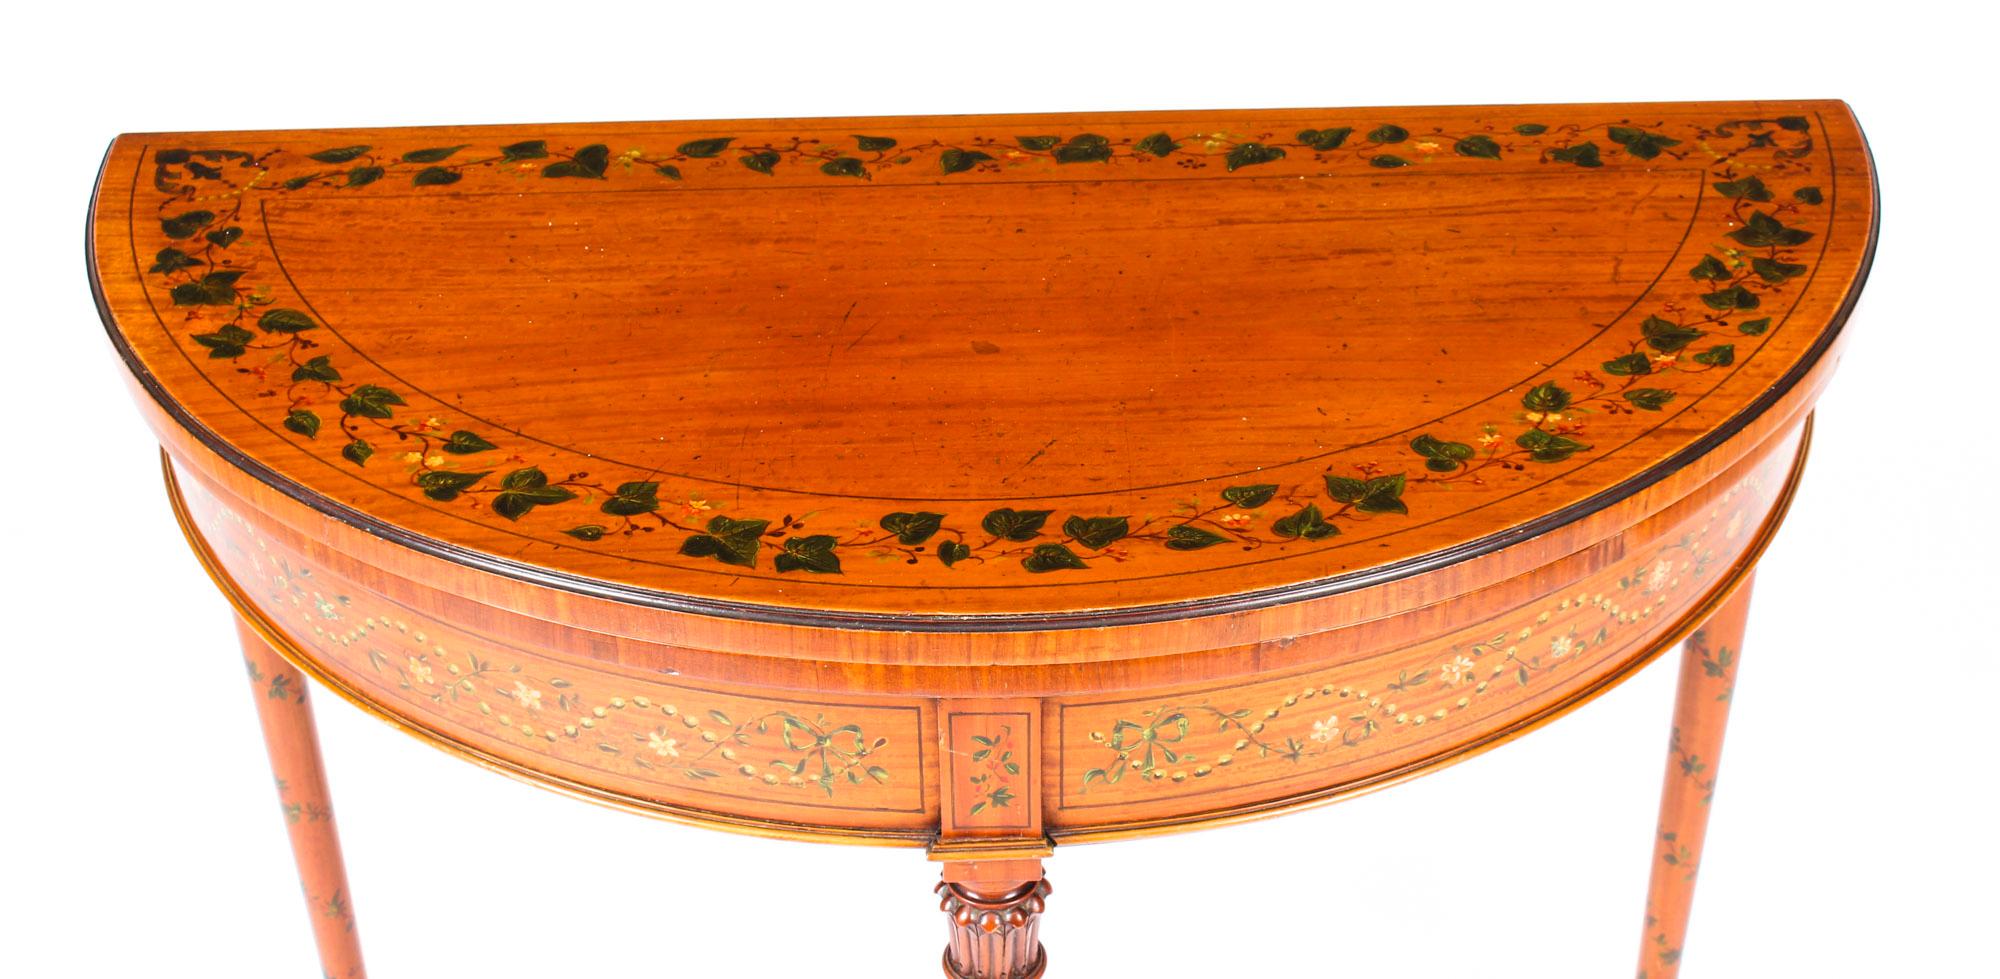 Hand-Painted Antique Hand Painted Satinwood Demi-Lune Card Console Table, 19th Century